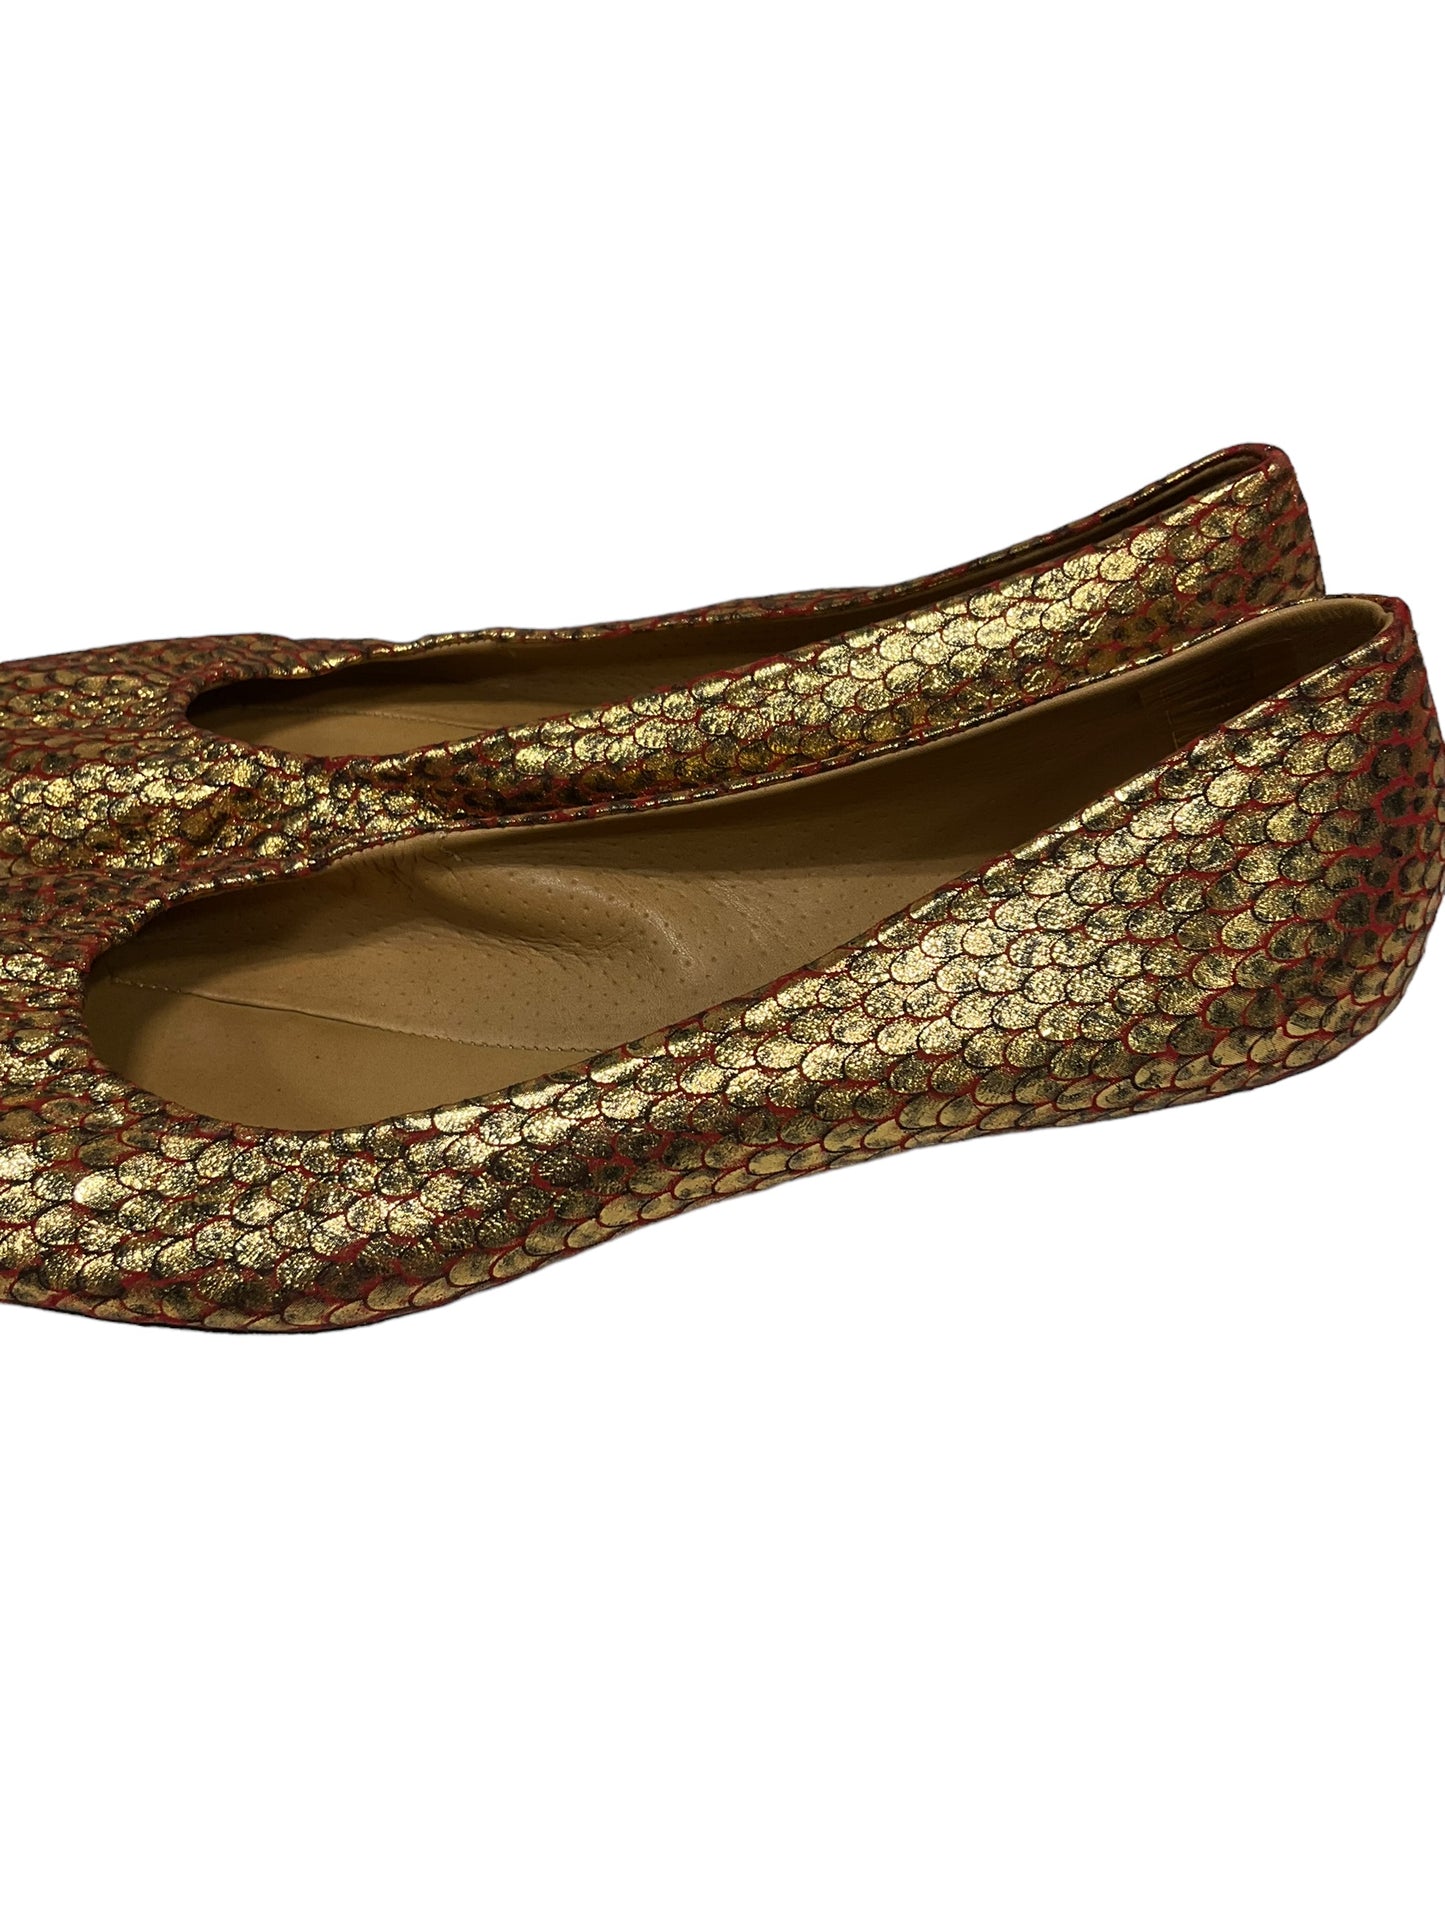 Shoes Flats Boat By Clothes Mentor  Size: 10